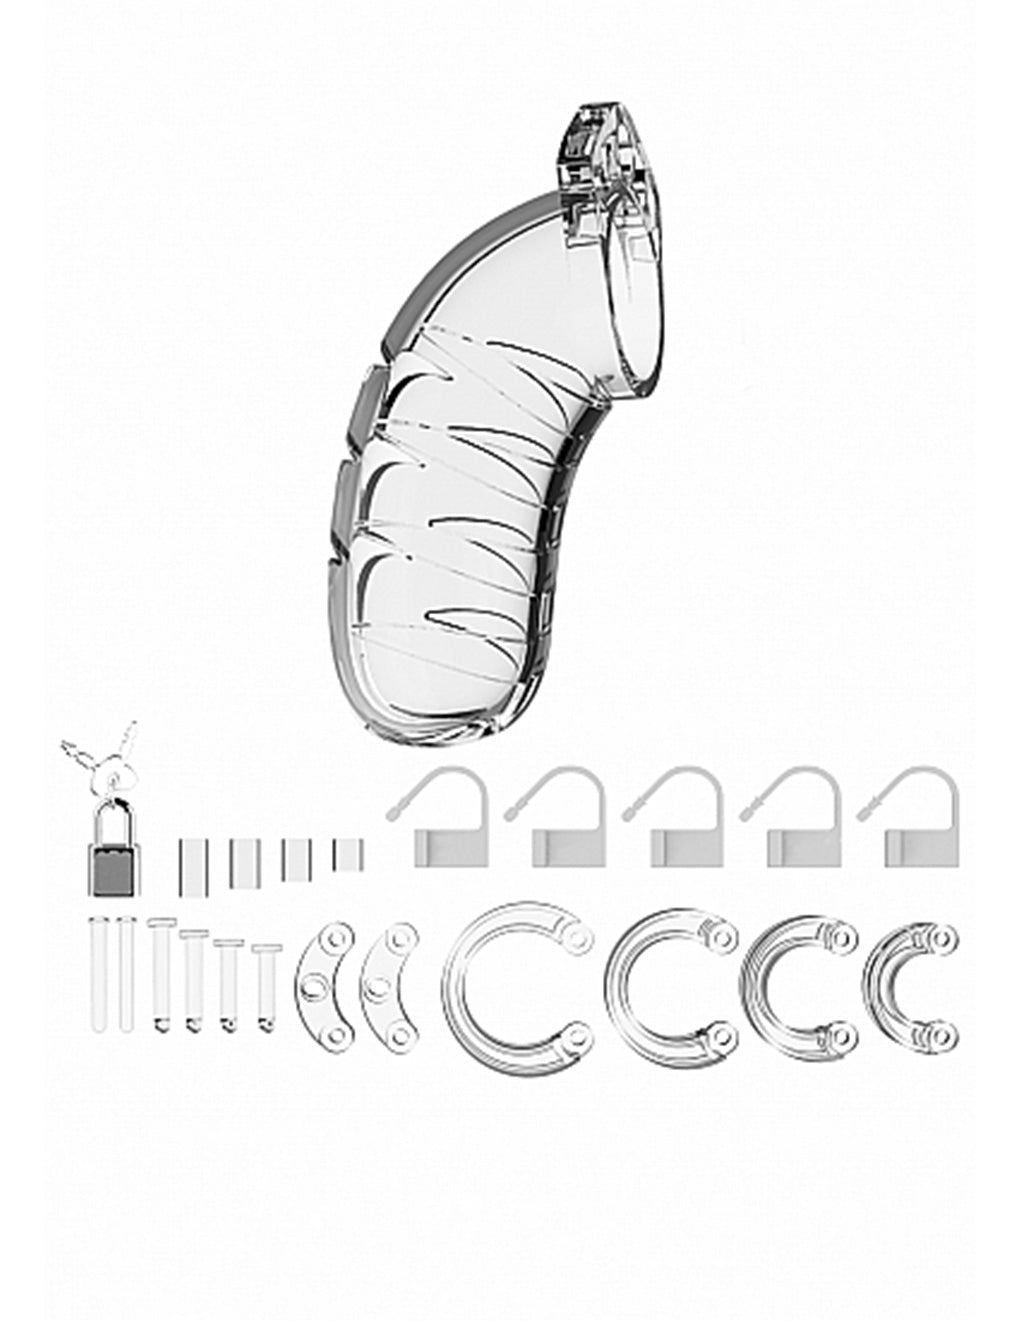 Model 4 Chastity 4.5" Transparent Cock Cage parts